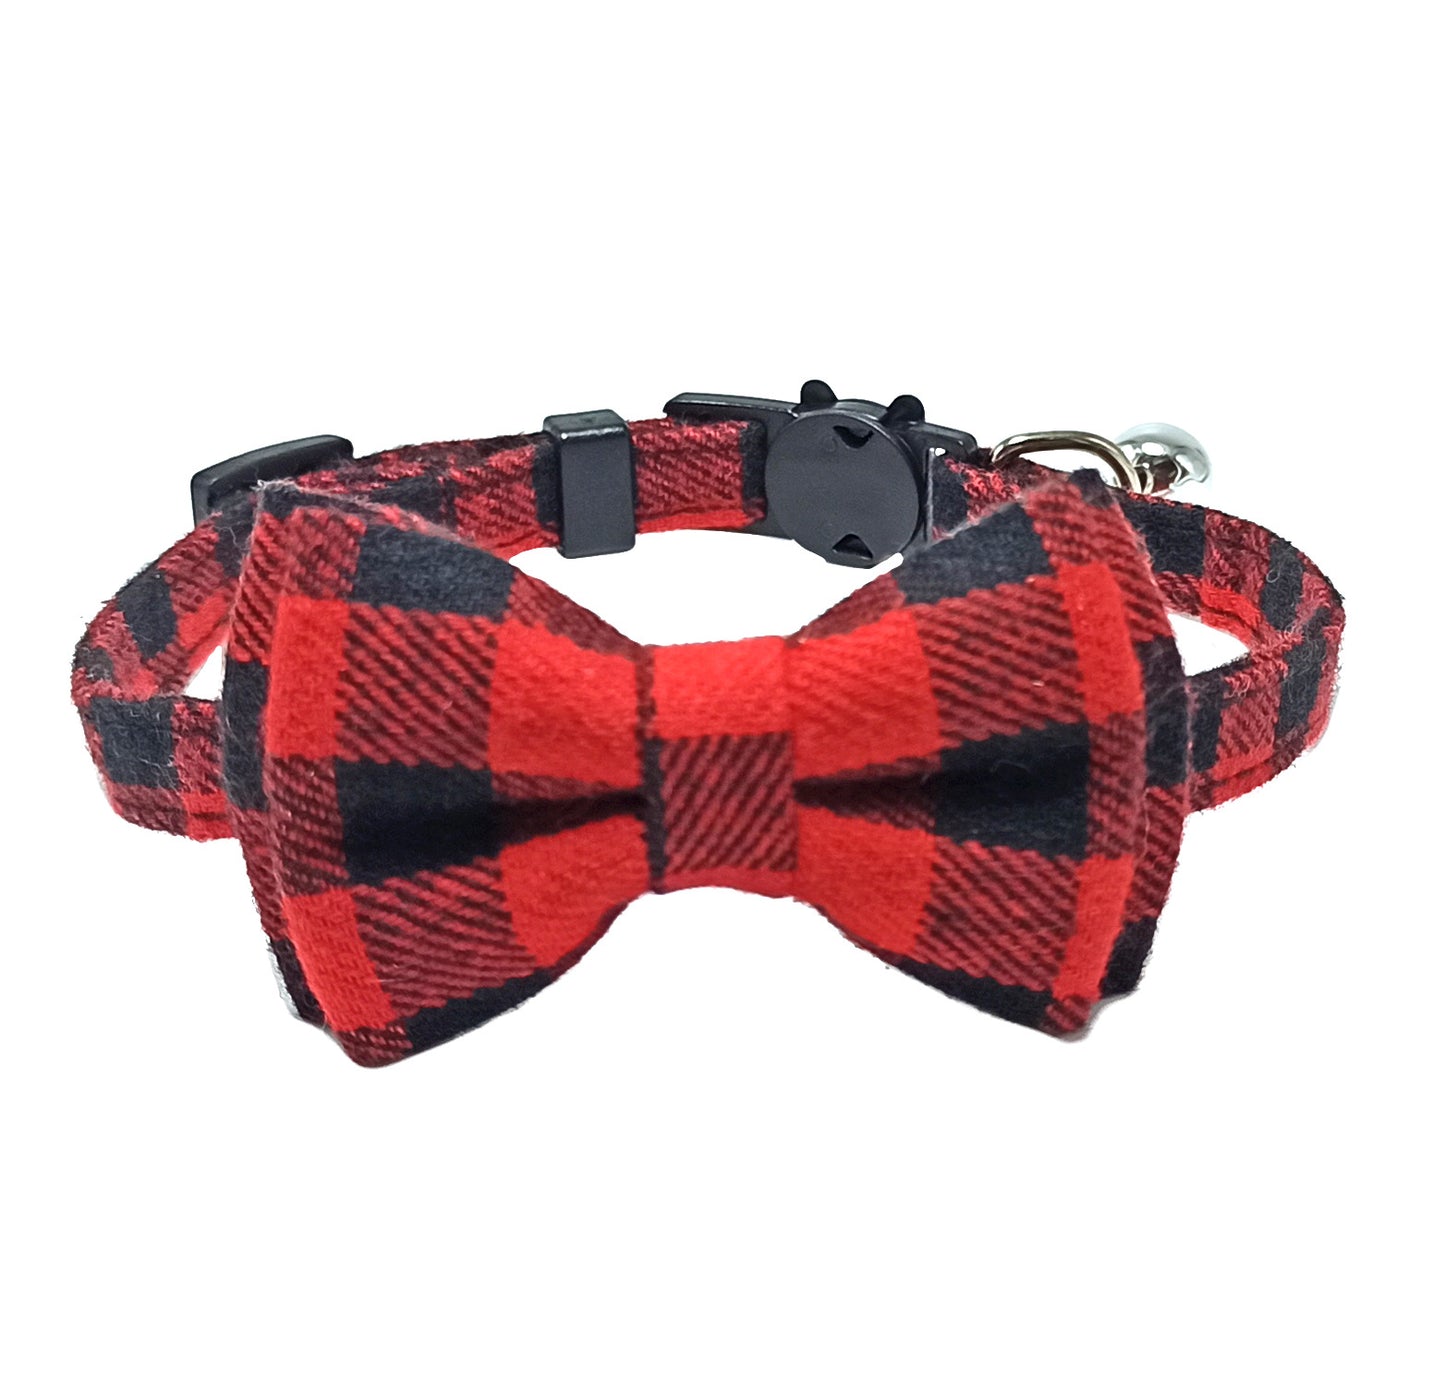 Cat collar with bow, plaid pattern in various colors